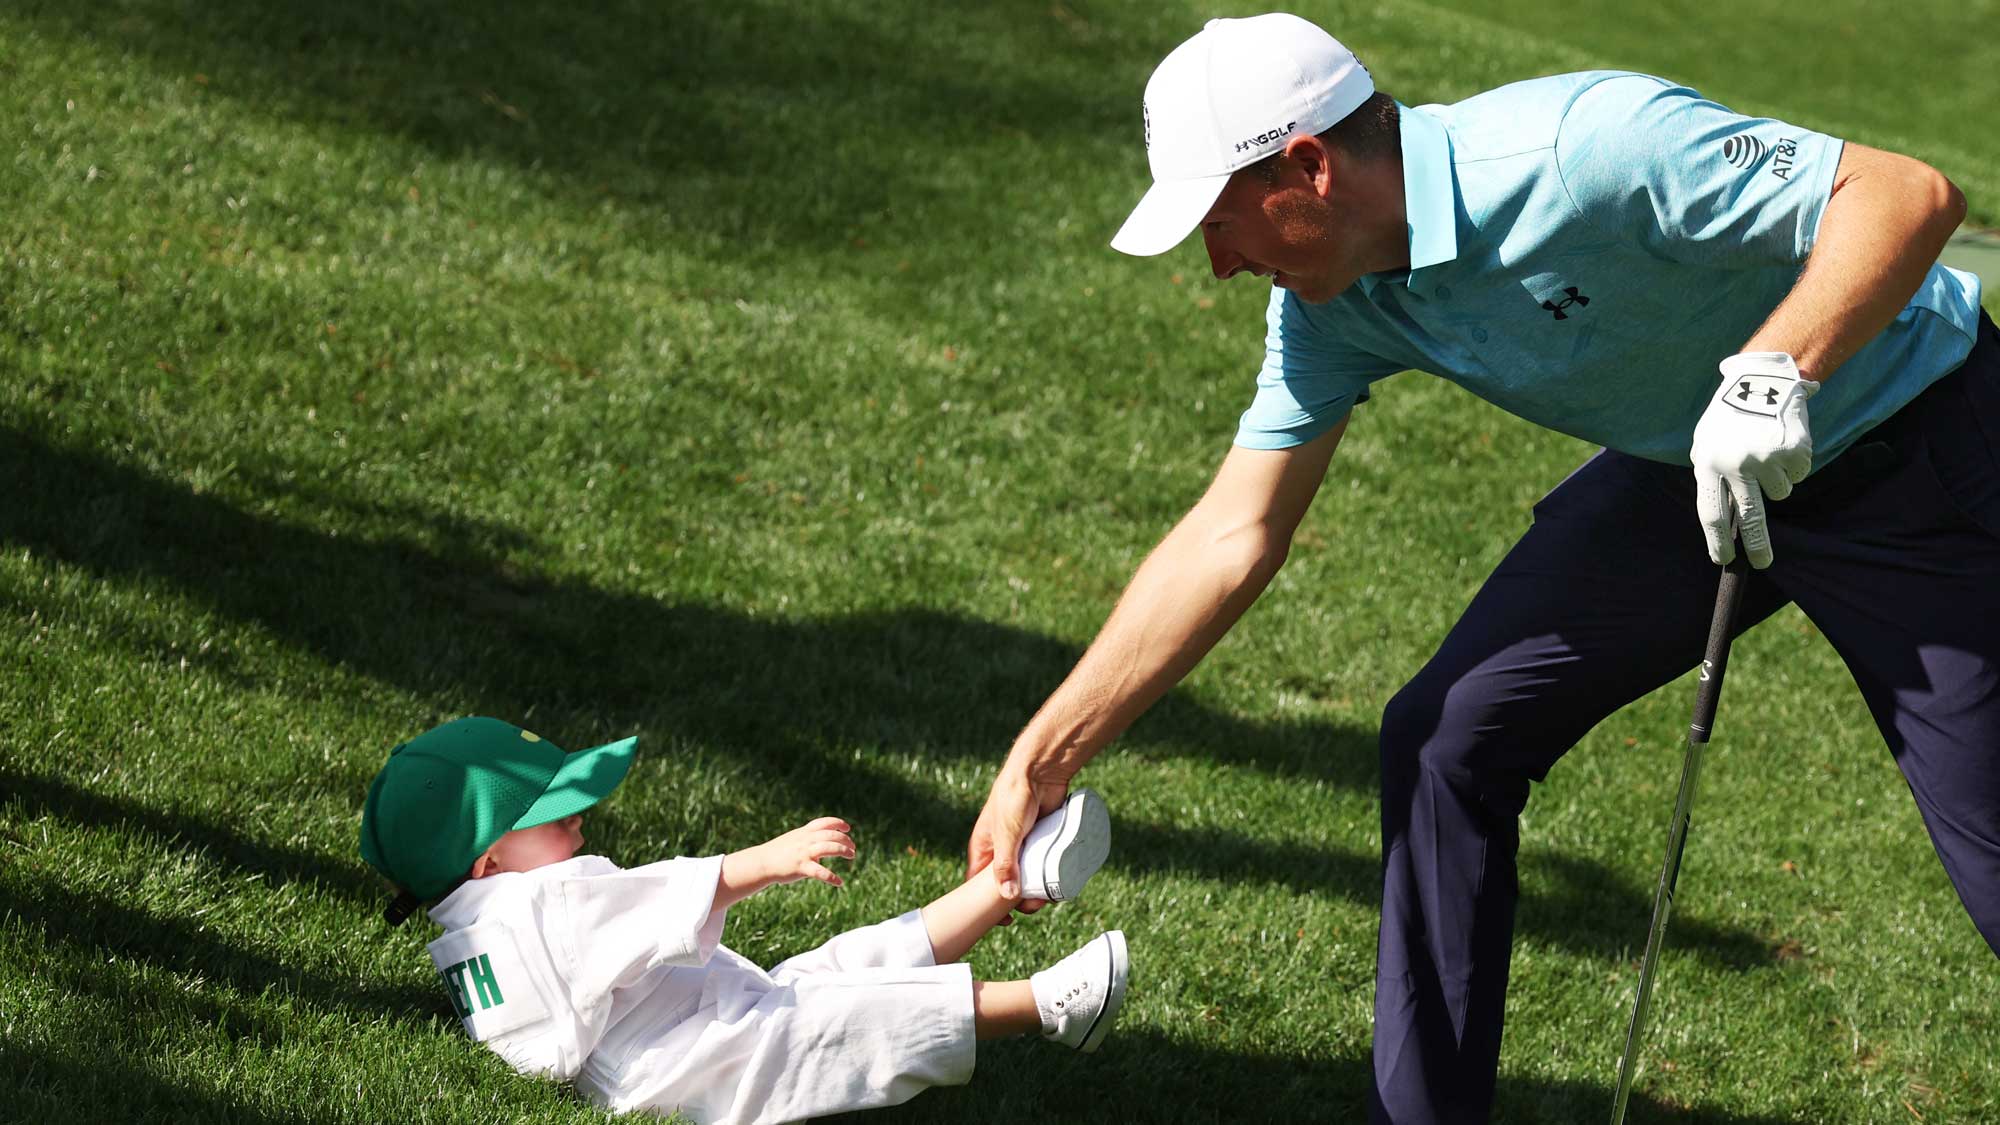 Rulebreaking at Augusta National? For a few glorious hours, it's all